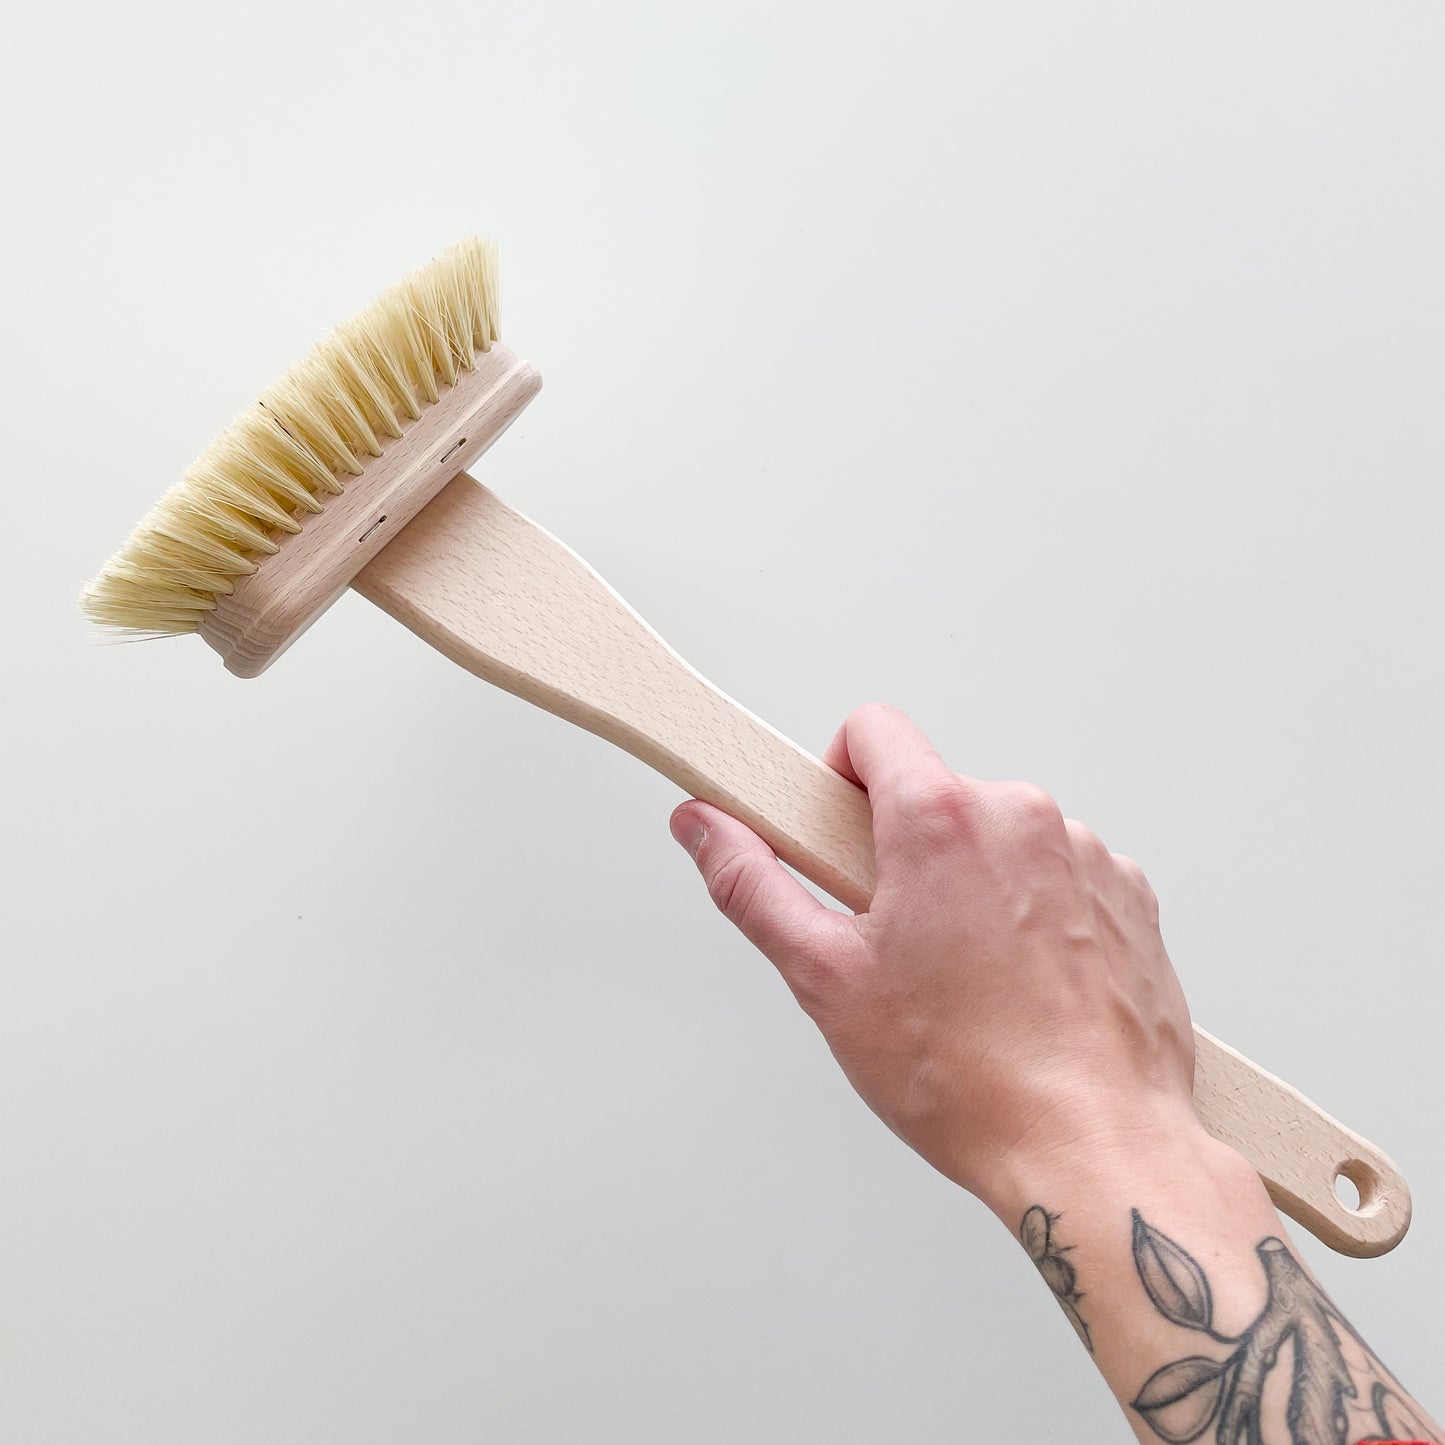 a hand holding a long bath cleaning brush